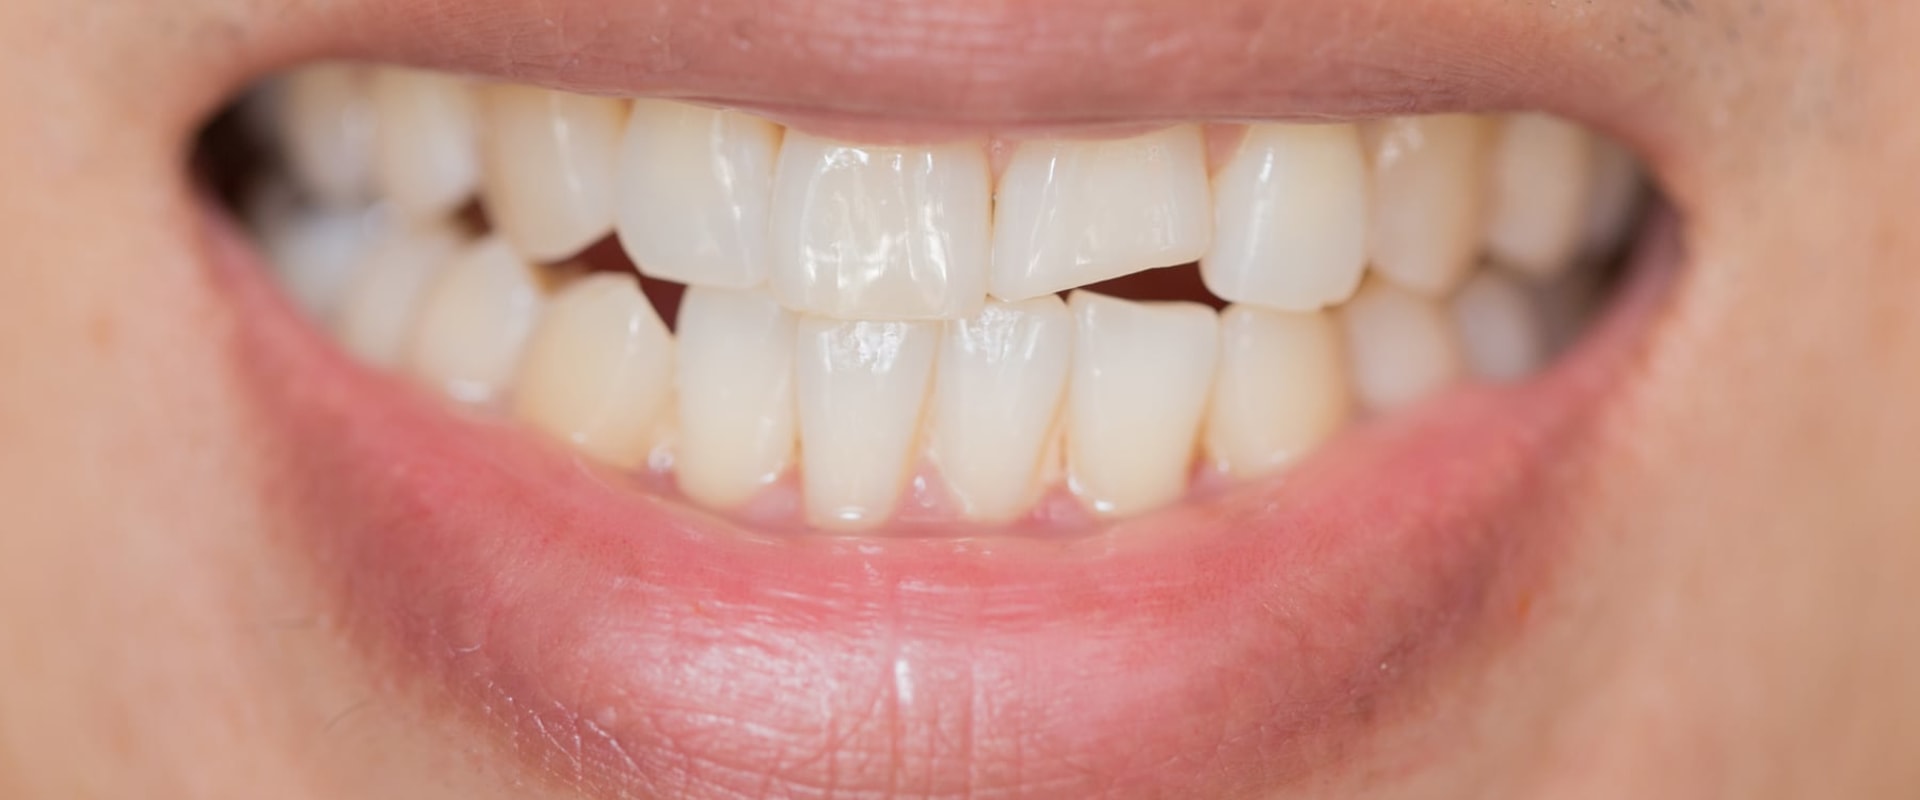 How to Protect Your Chipped Tooth and Avoid Further Damage